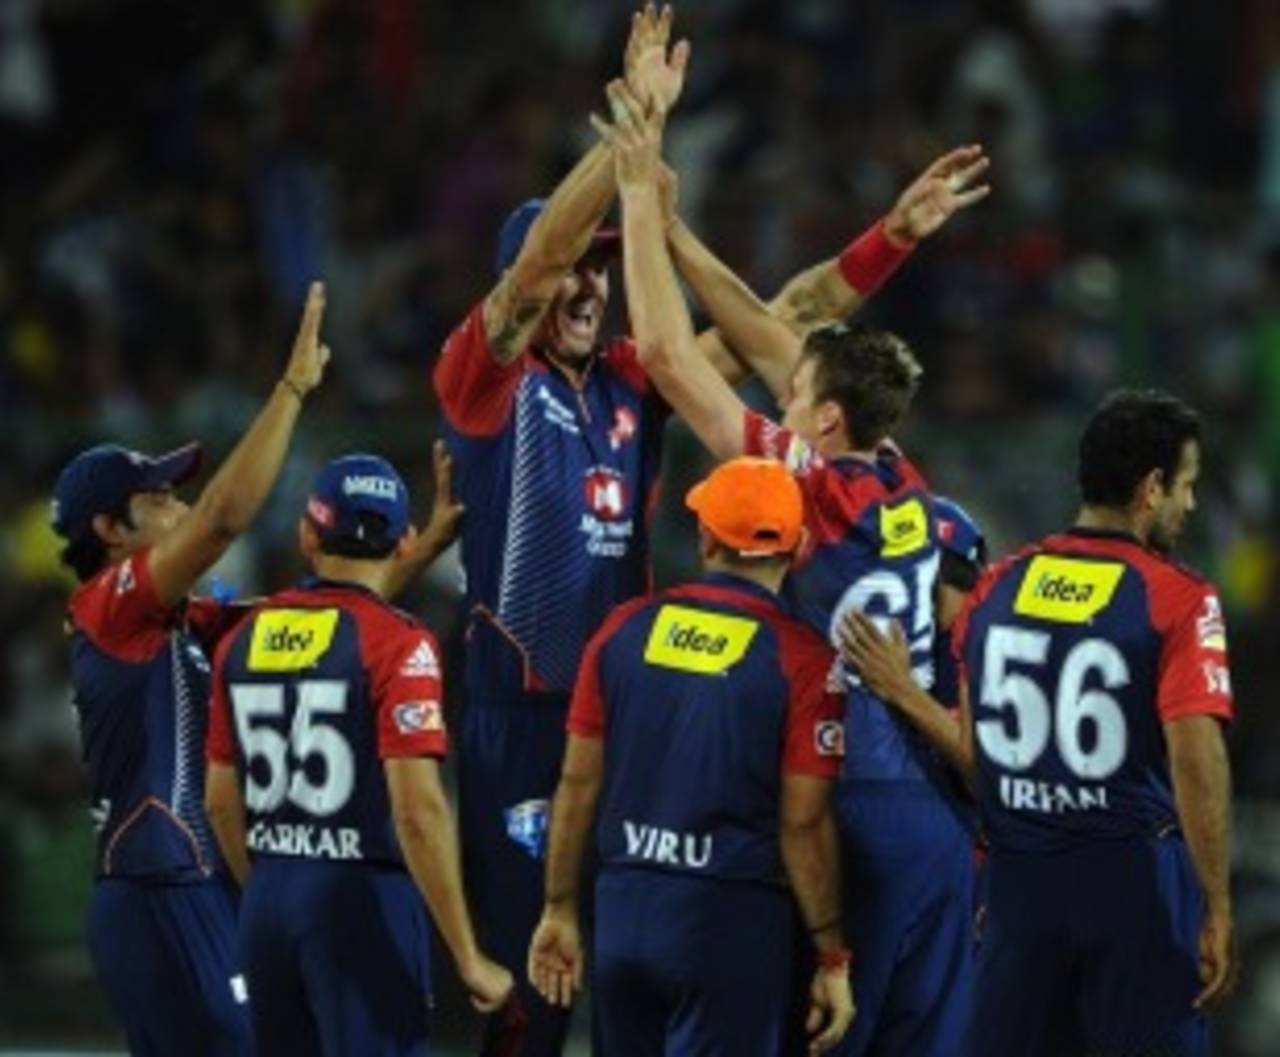 Kevin Pietersen gets on stilts just so he can look down at Morne Morkel during a celebration routine&nbsp;&nbsp;&bull;&nbsp;&nbsp;AFP